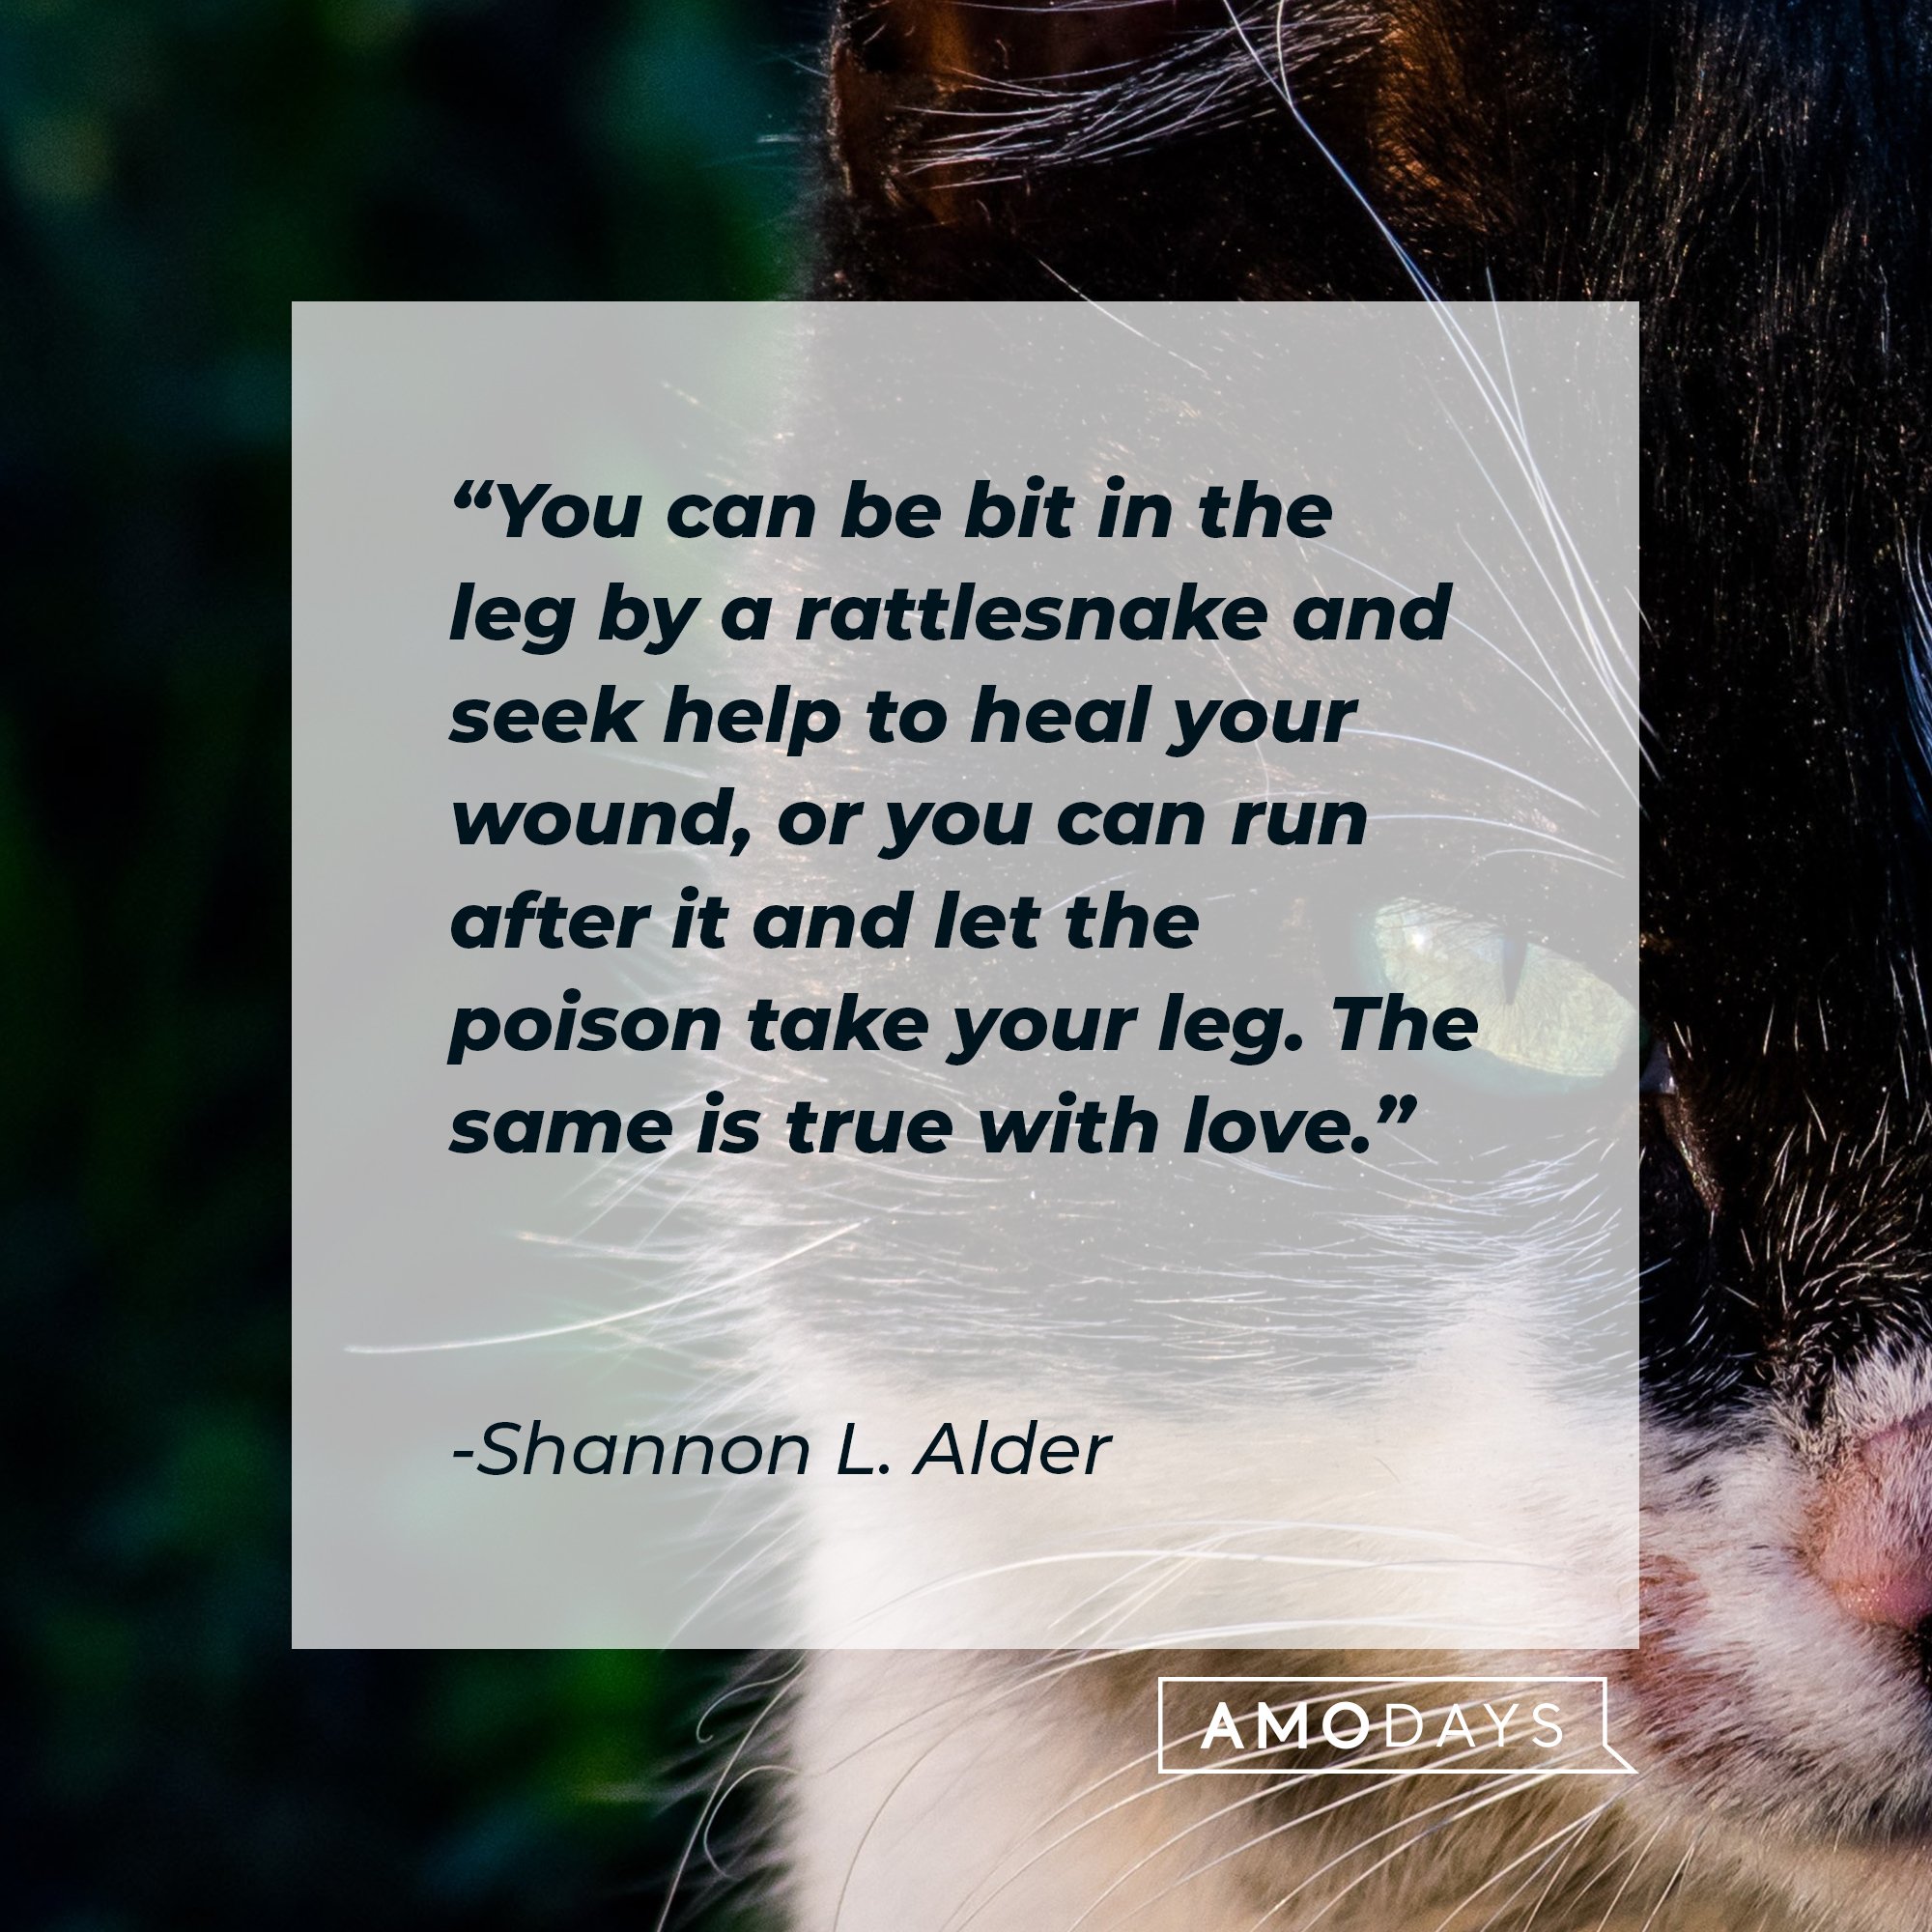 Shannon L. Alder's quote: "You can be bit in the leg by a rattlesnake and seek help to heal your wound, or you can run after it and let the poison take your leg. The same is true with love." | Image: AmoDays